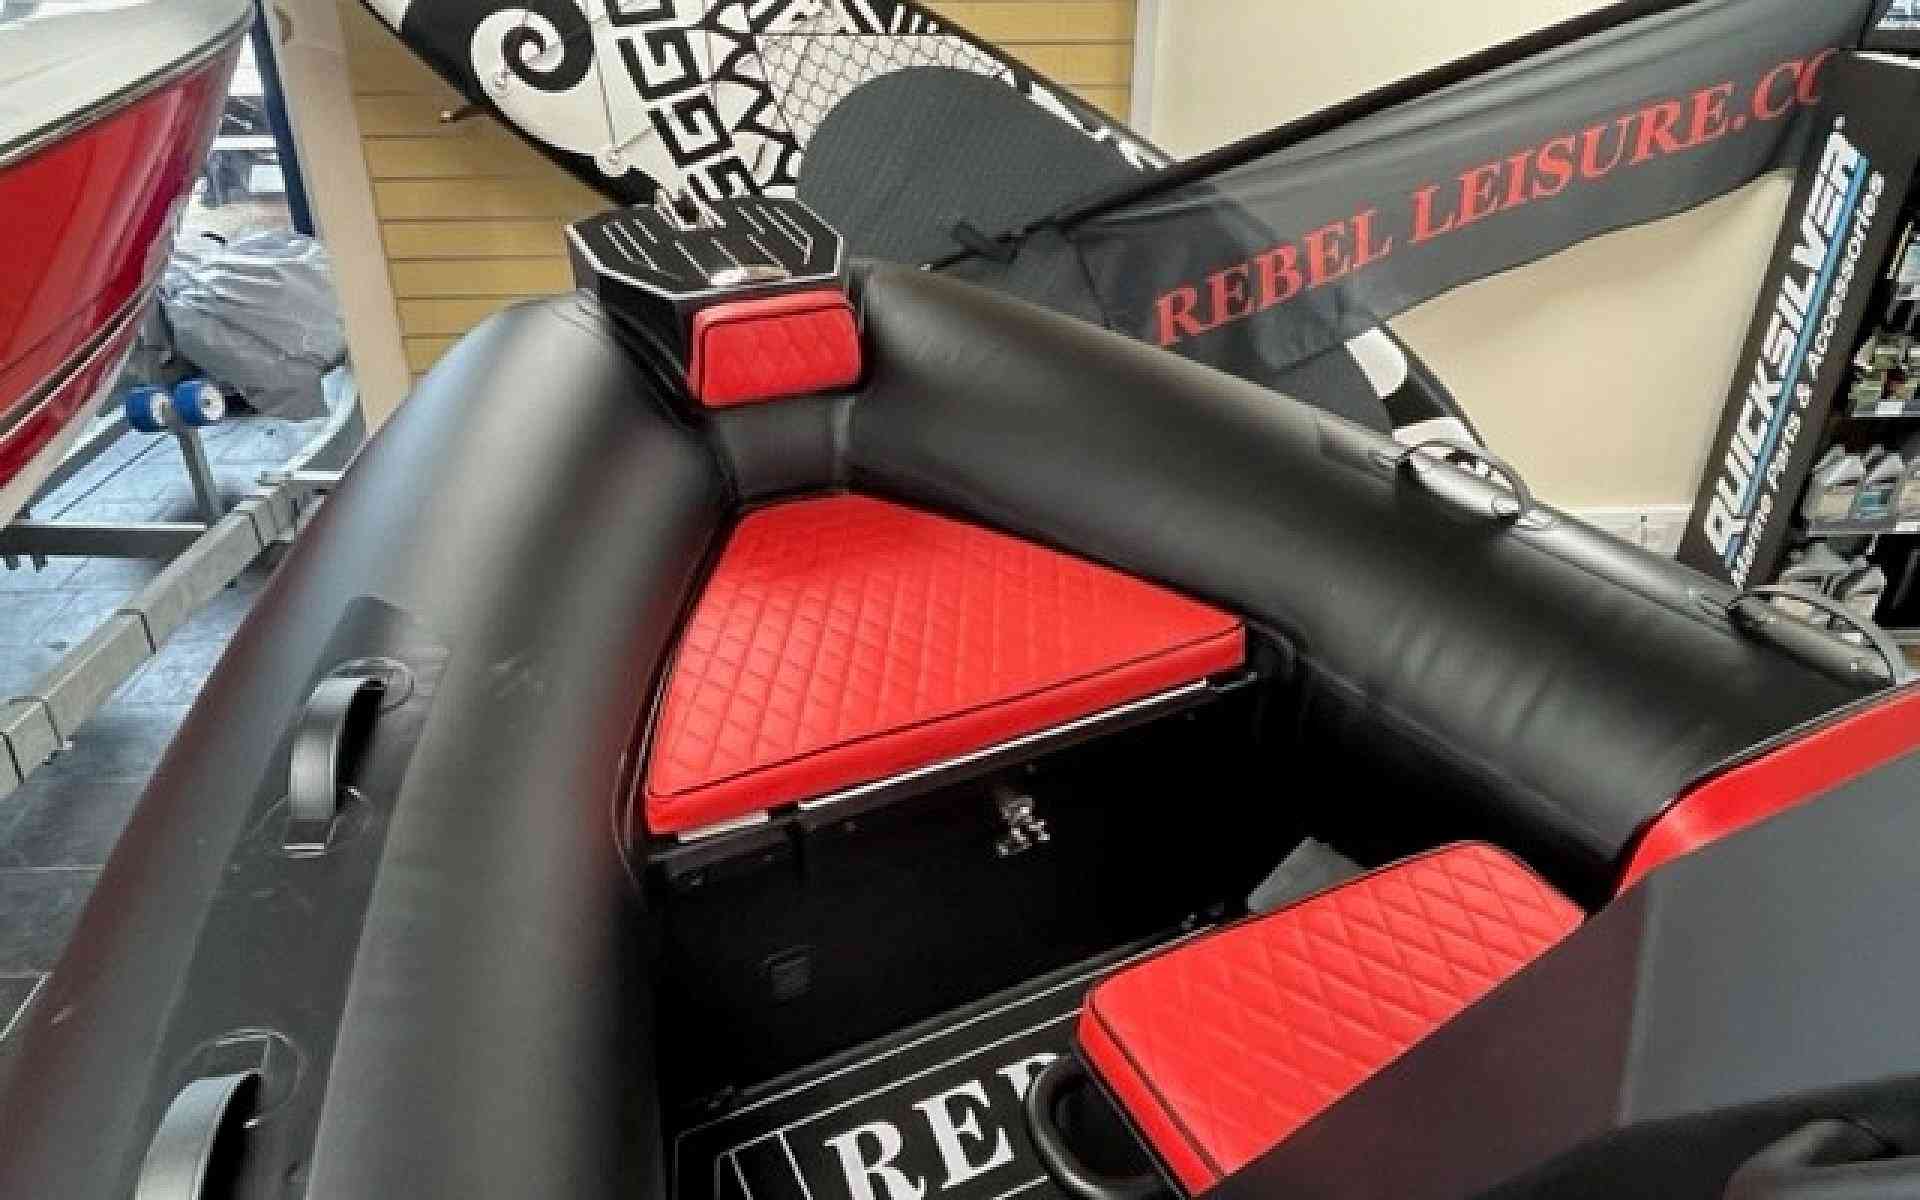 REBEL RIOT 580 RIB (2023) bowseat boats for sale in North Wales